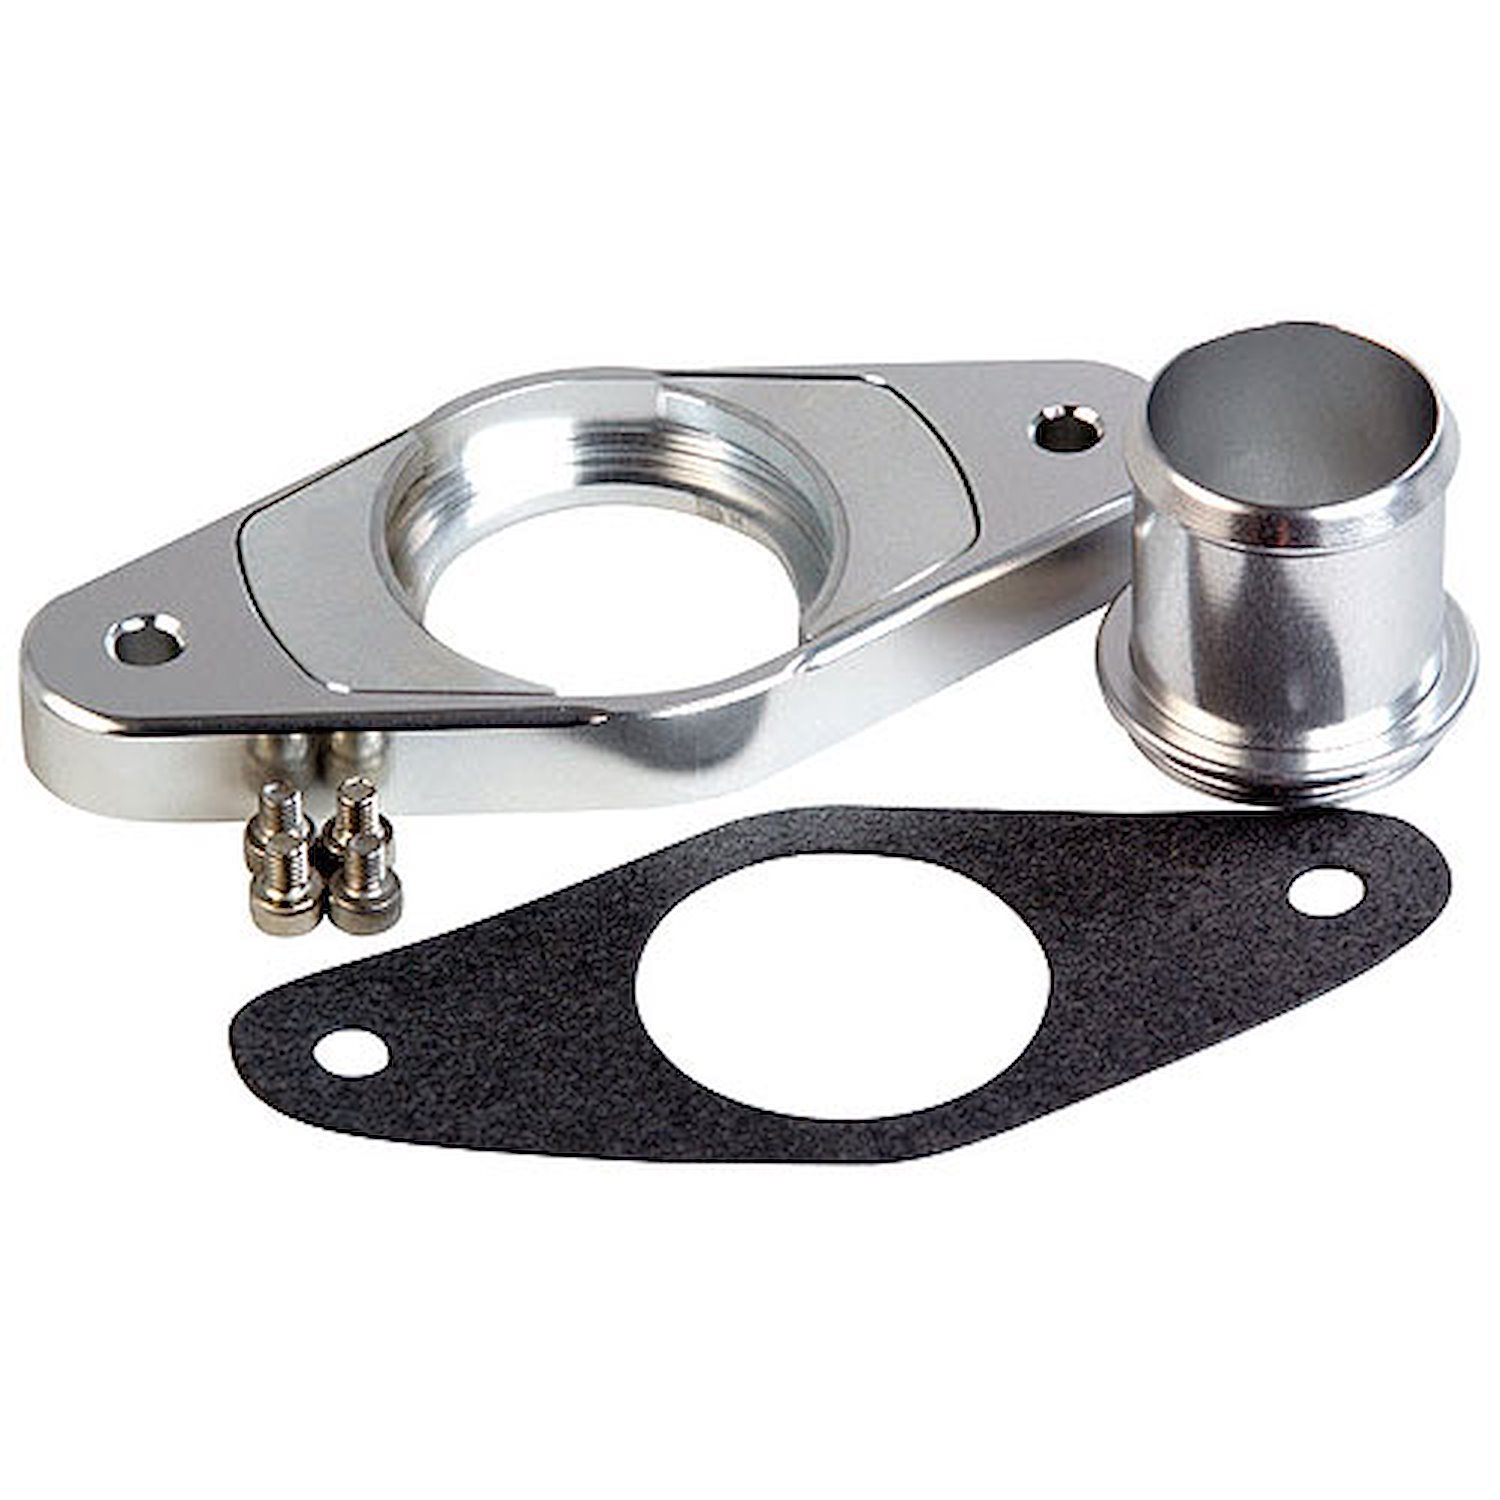 Type 5 BOV Flange Adapter Kit Fits for Subaru WRX (MY08-13)